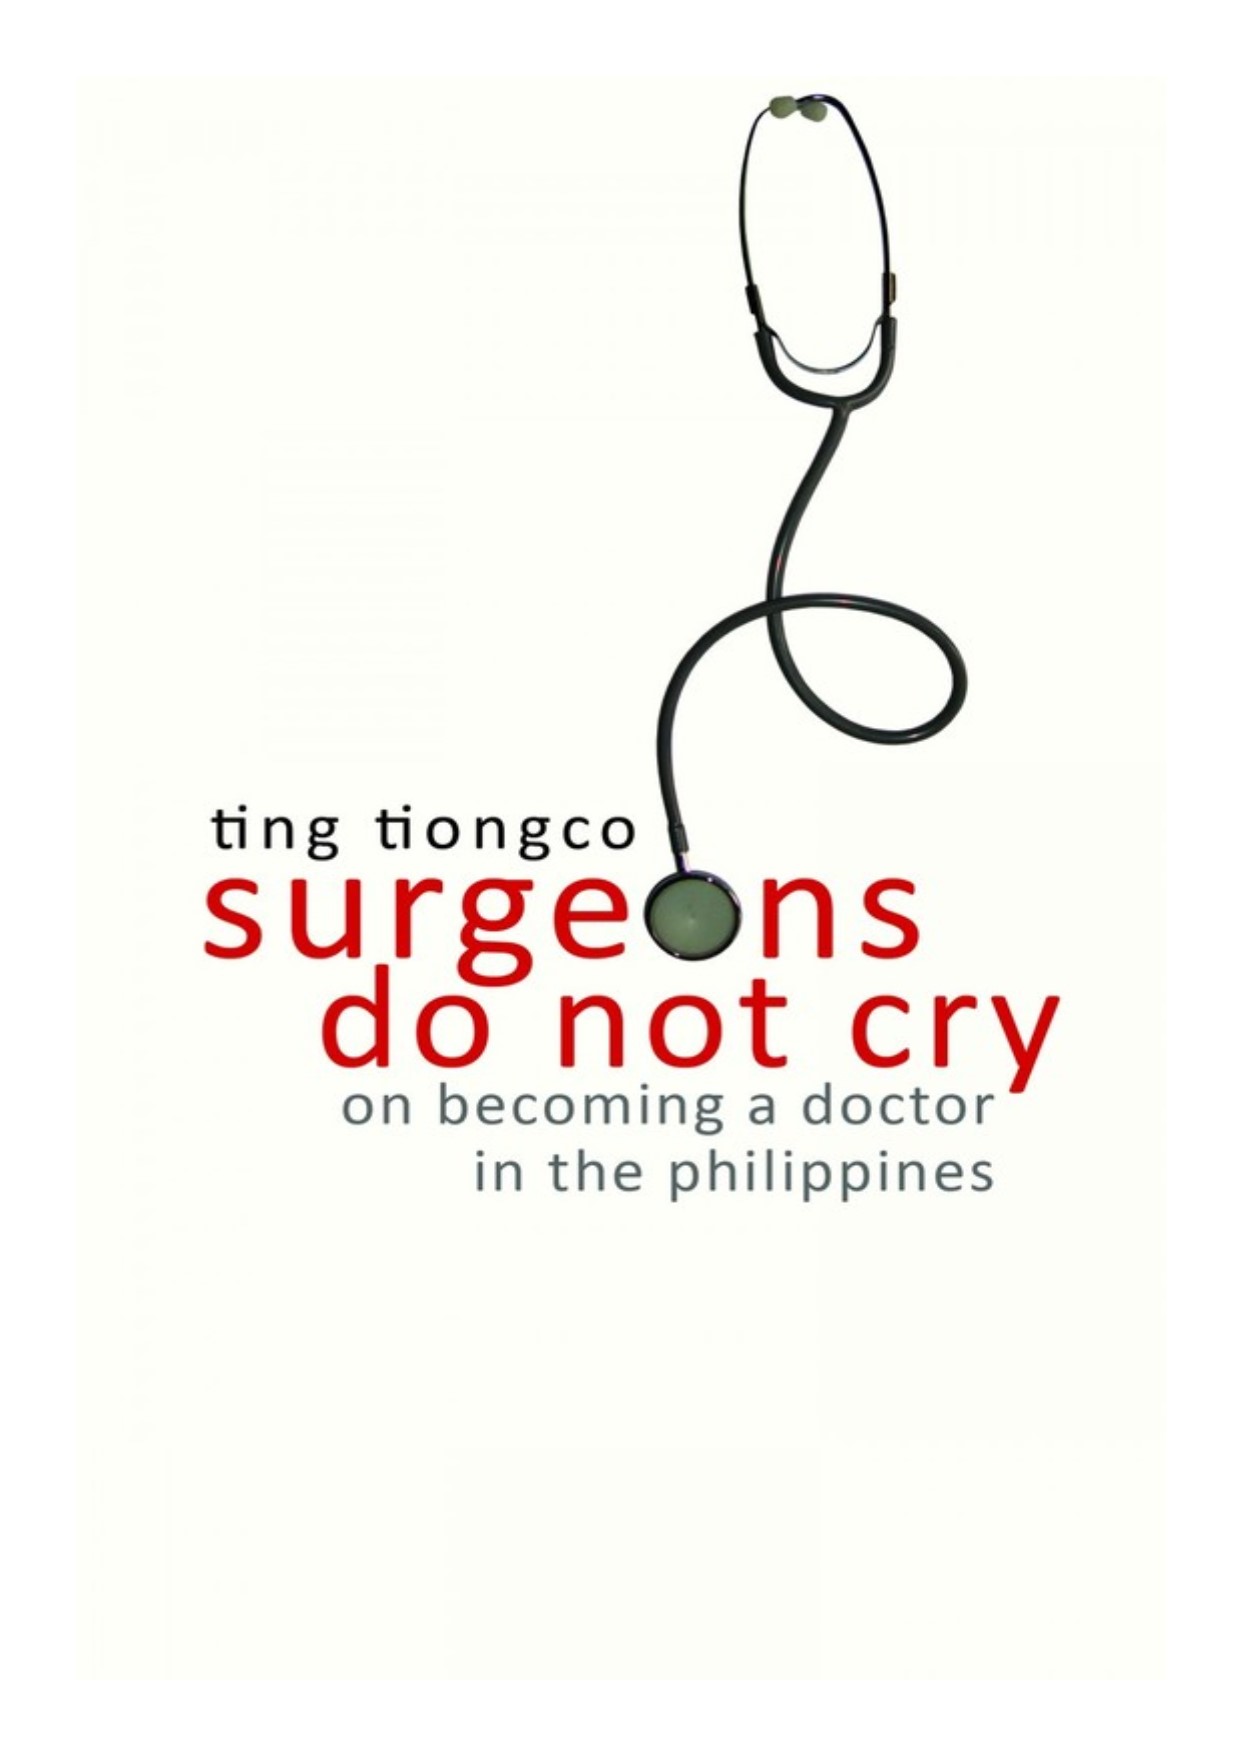 Surgeons do not cry on becoming a doctor in the Philippines